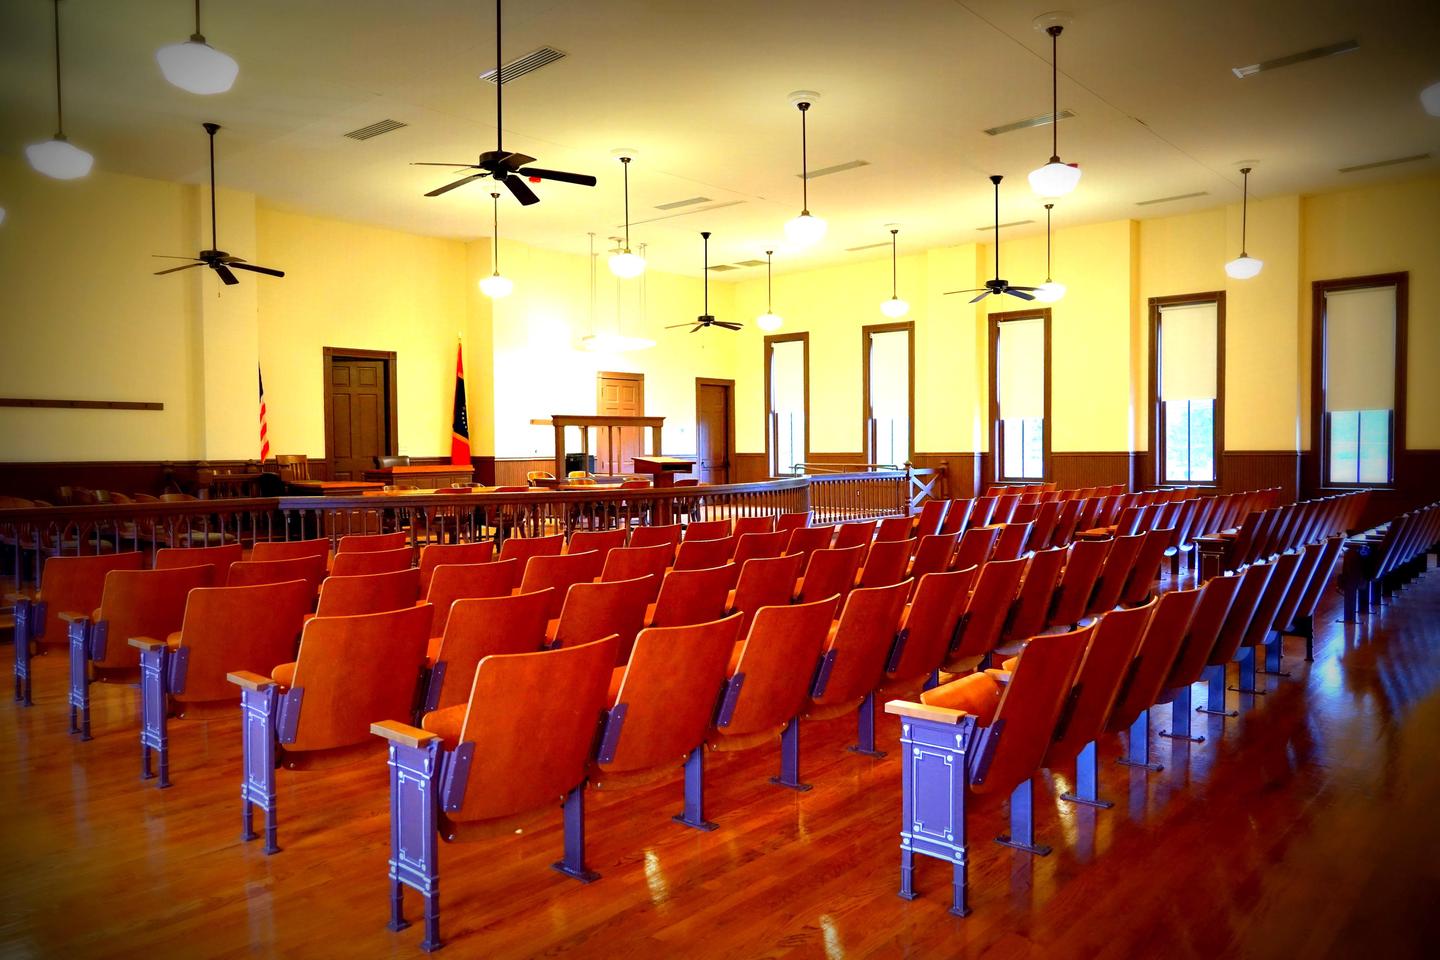 Tallahatchie County Courthouse CourtroomPresent-day interior view of the Tallahatchie County Courthouse courtroom where the trial of the men accused of lynching Emmett Till took place took place.